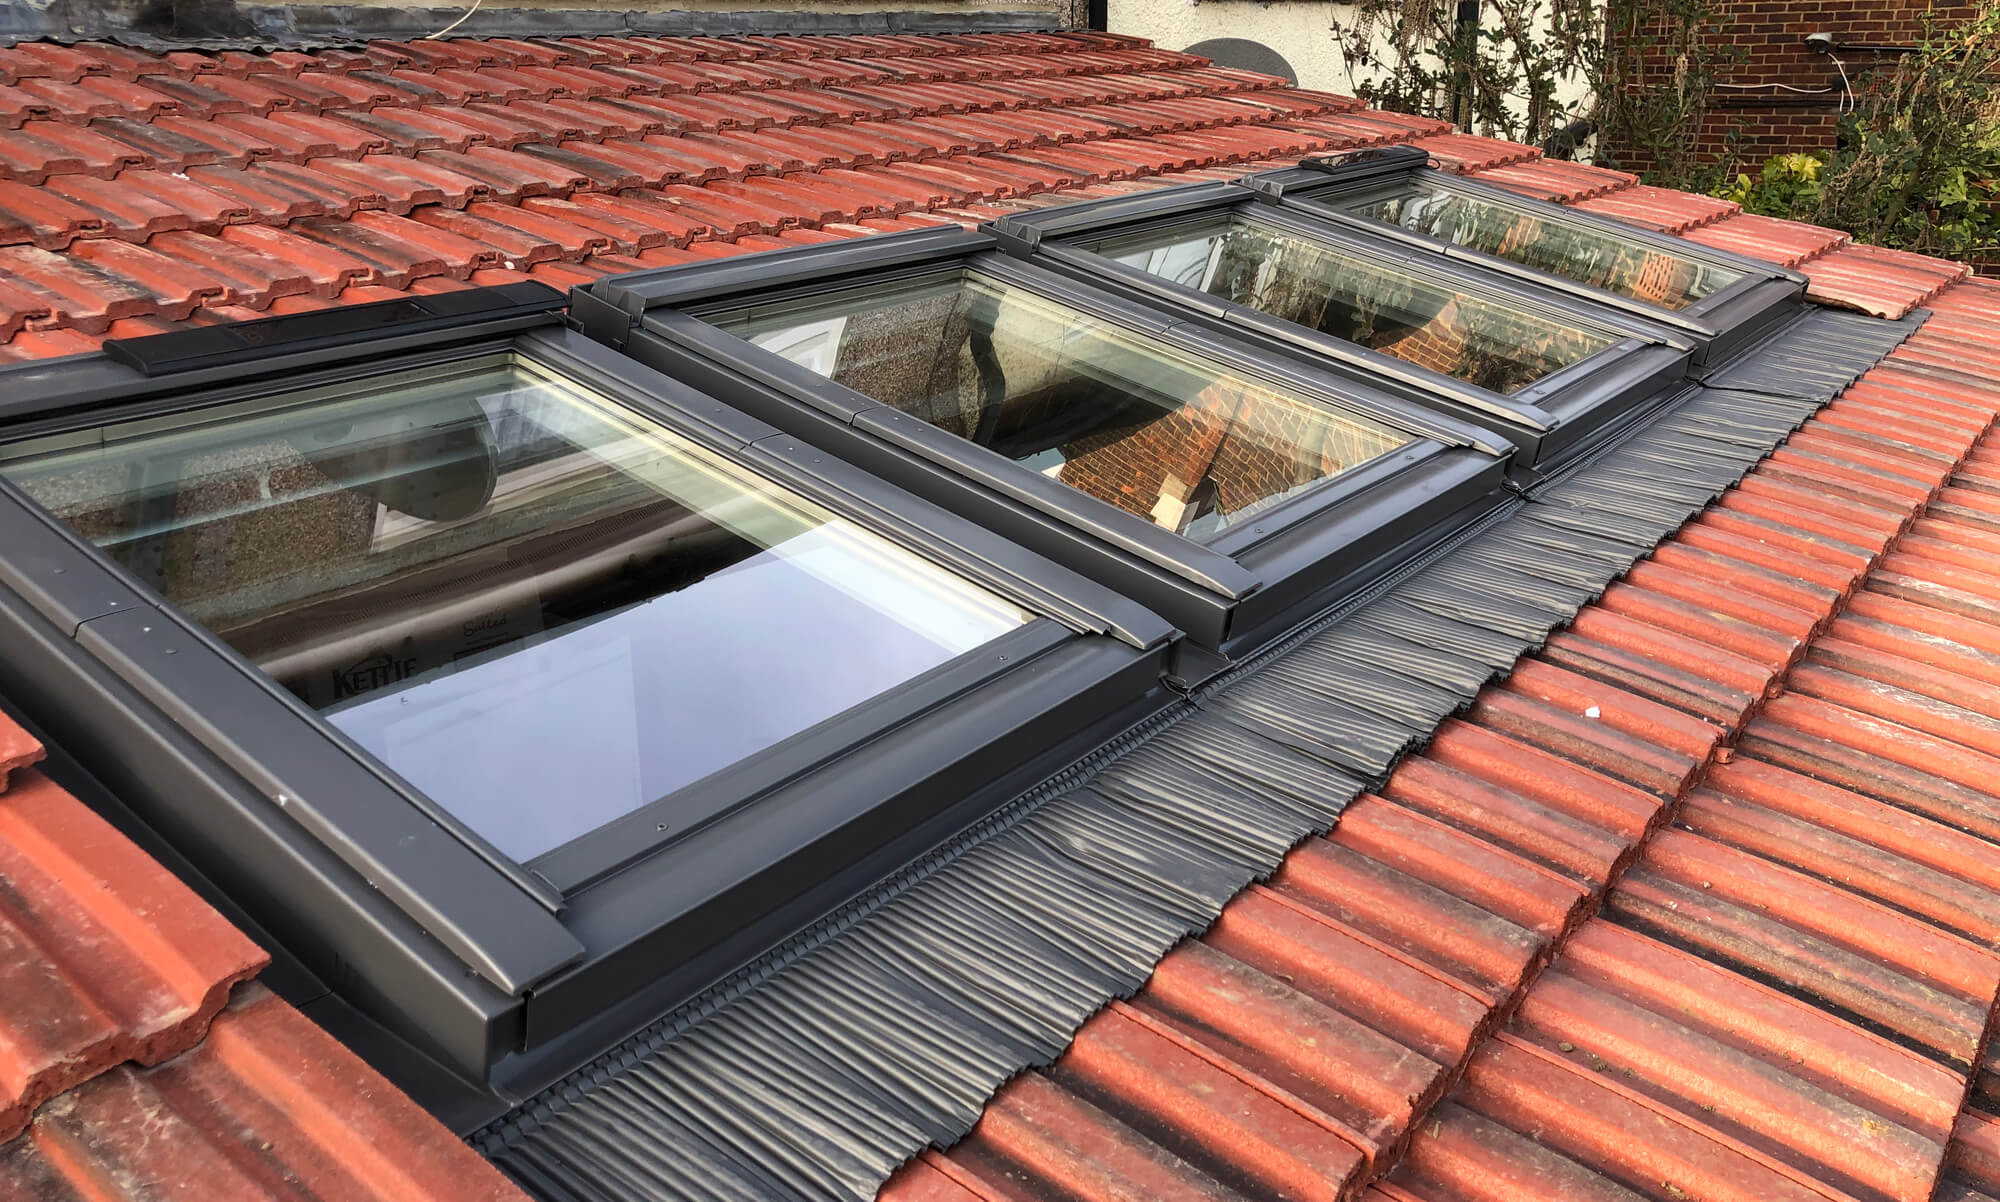 The image shows a close-up of a slanted red-tiled roof with four dormer Velux windows installed.